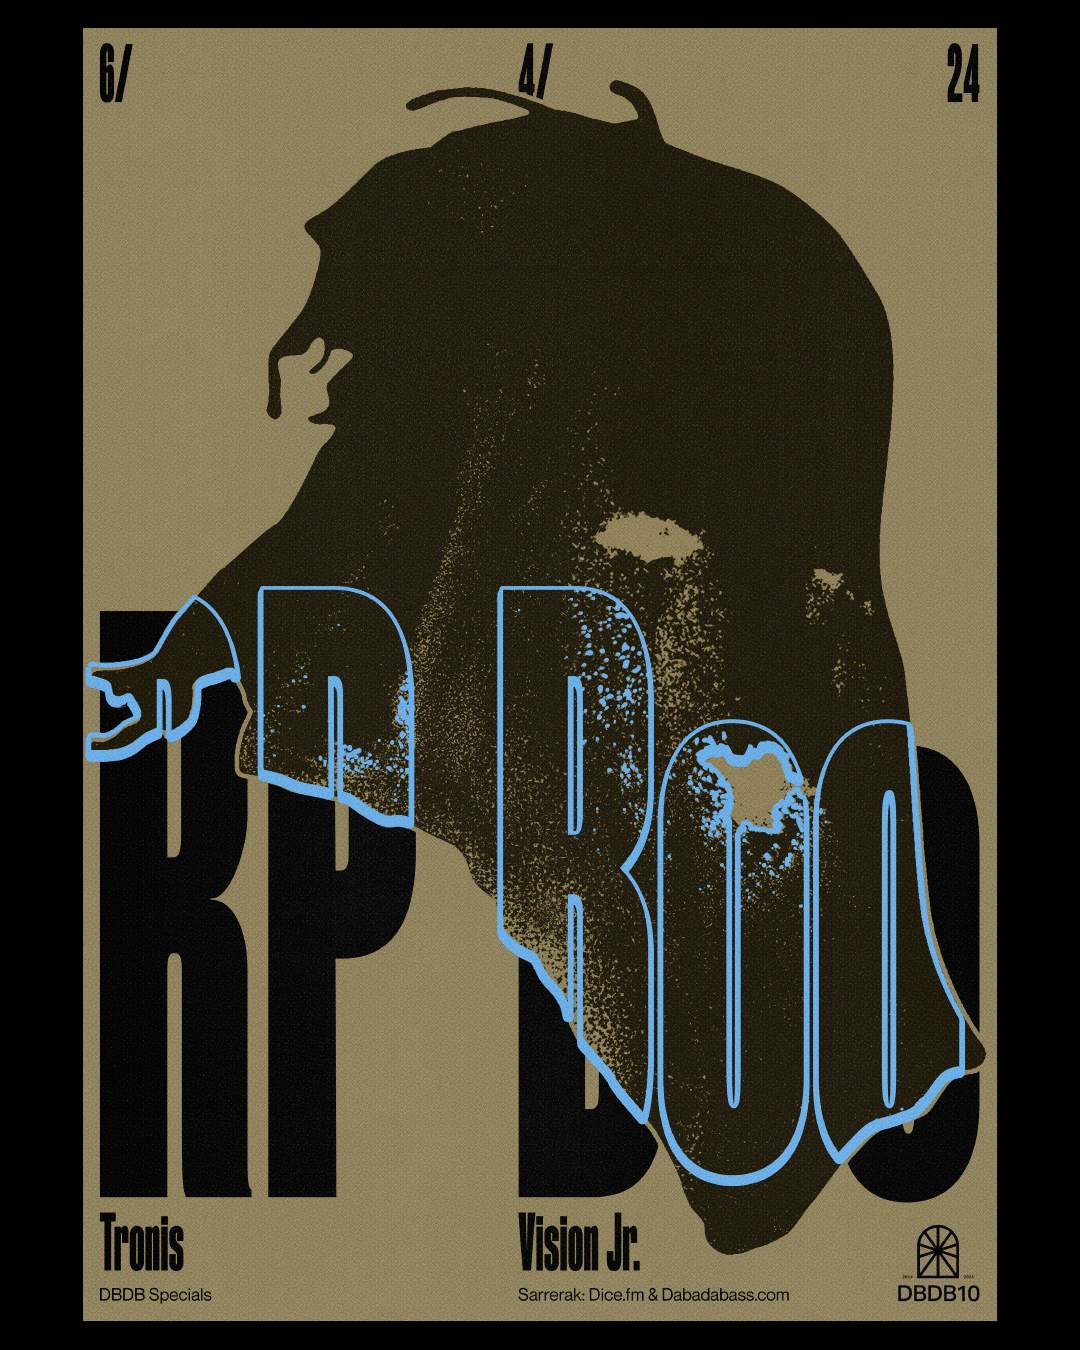 DBDB Specials: RP Boo + Tronis + Vision Jr - フライヤー表